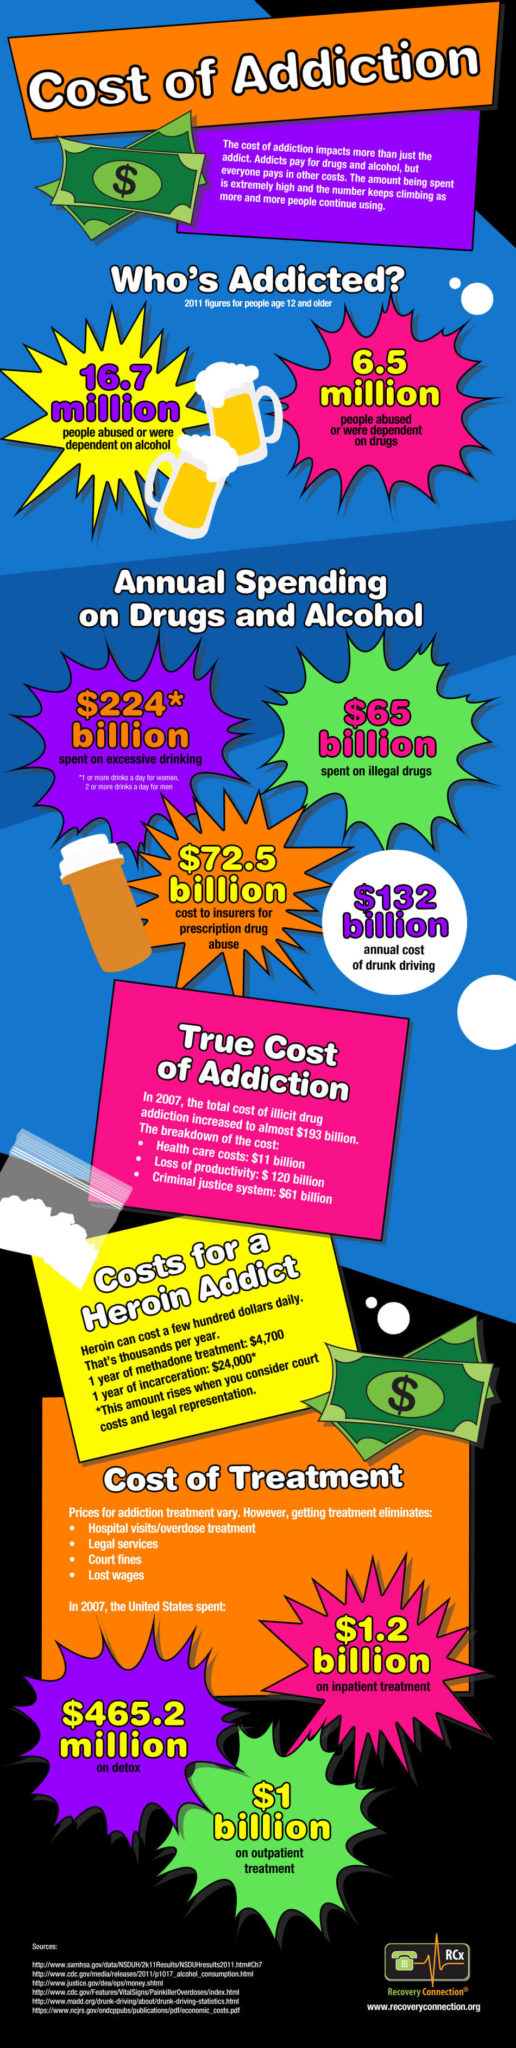 cost-of-addiction-infographic